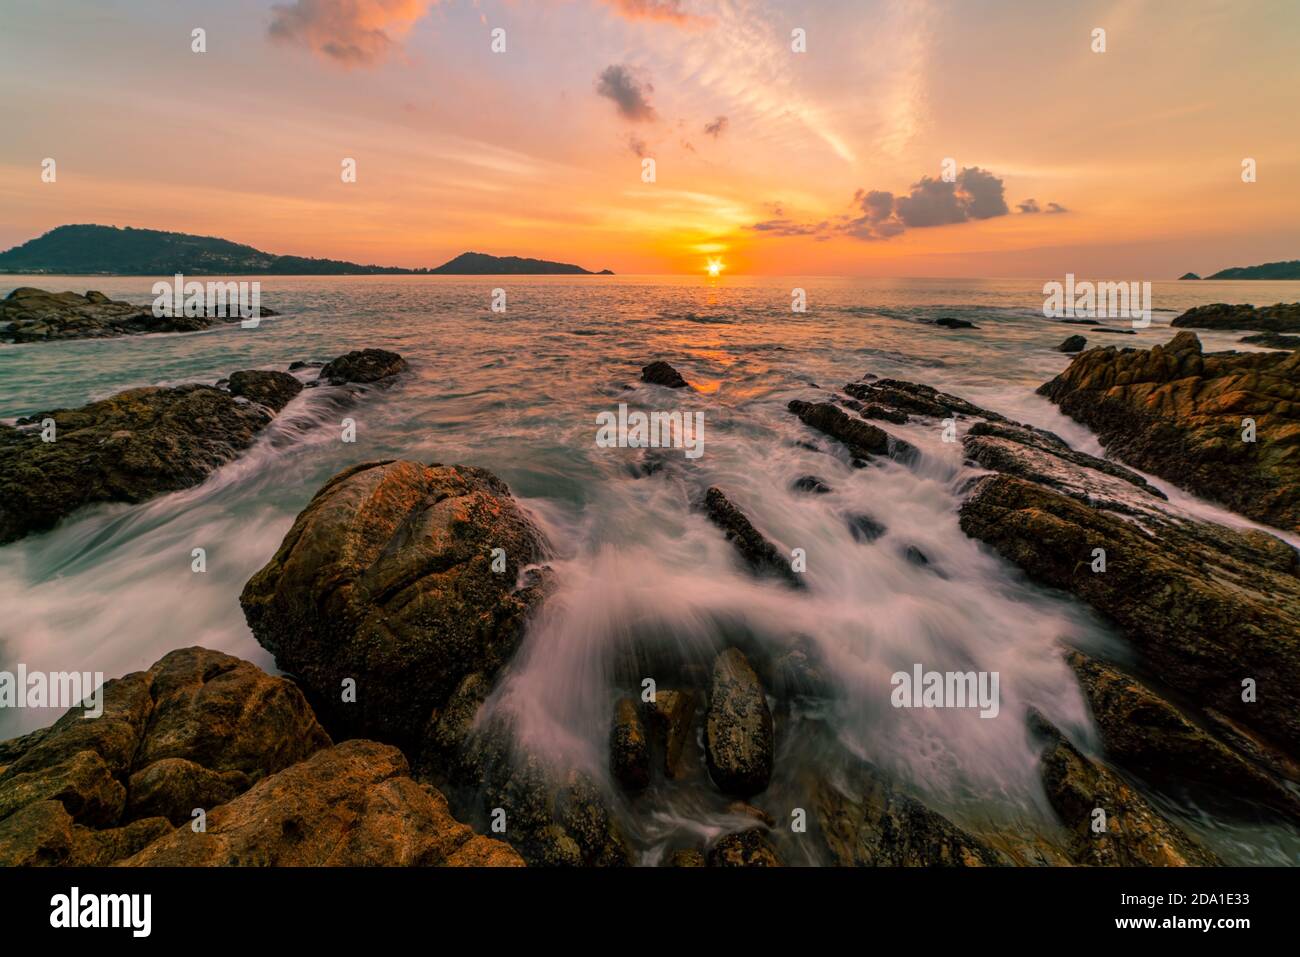 Long exposure image of Dramatic sky seascape with rocks in the foreground sunset or sunrise over sea scenery background Stock Photo